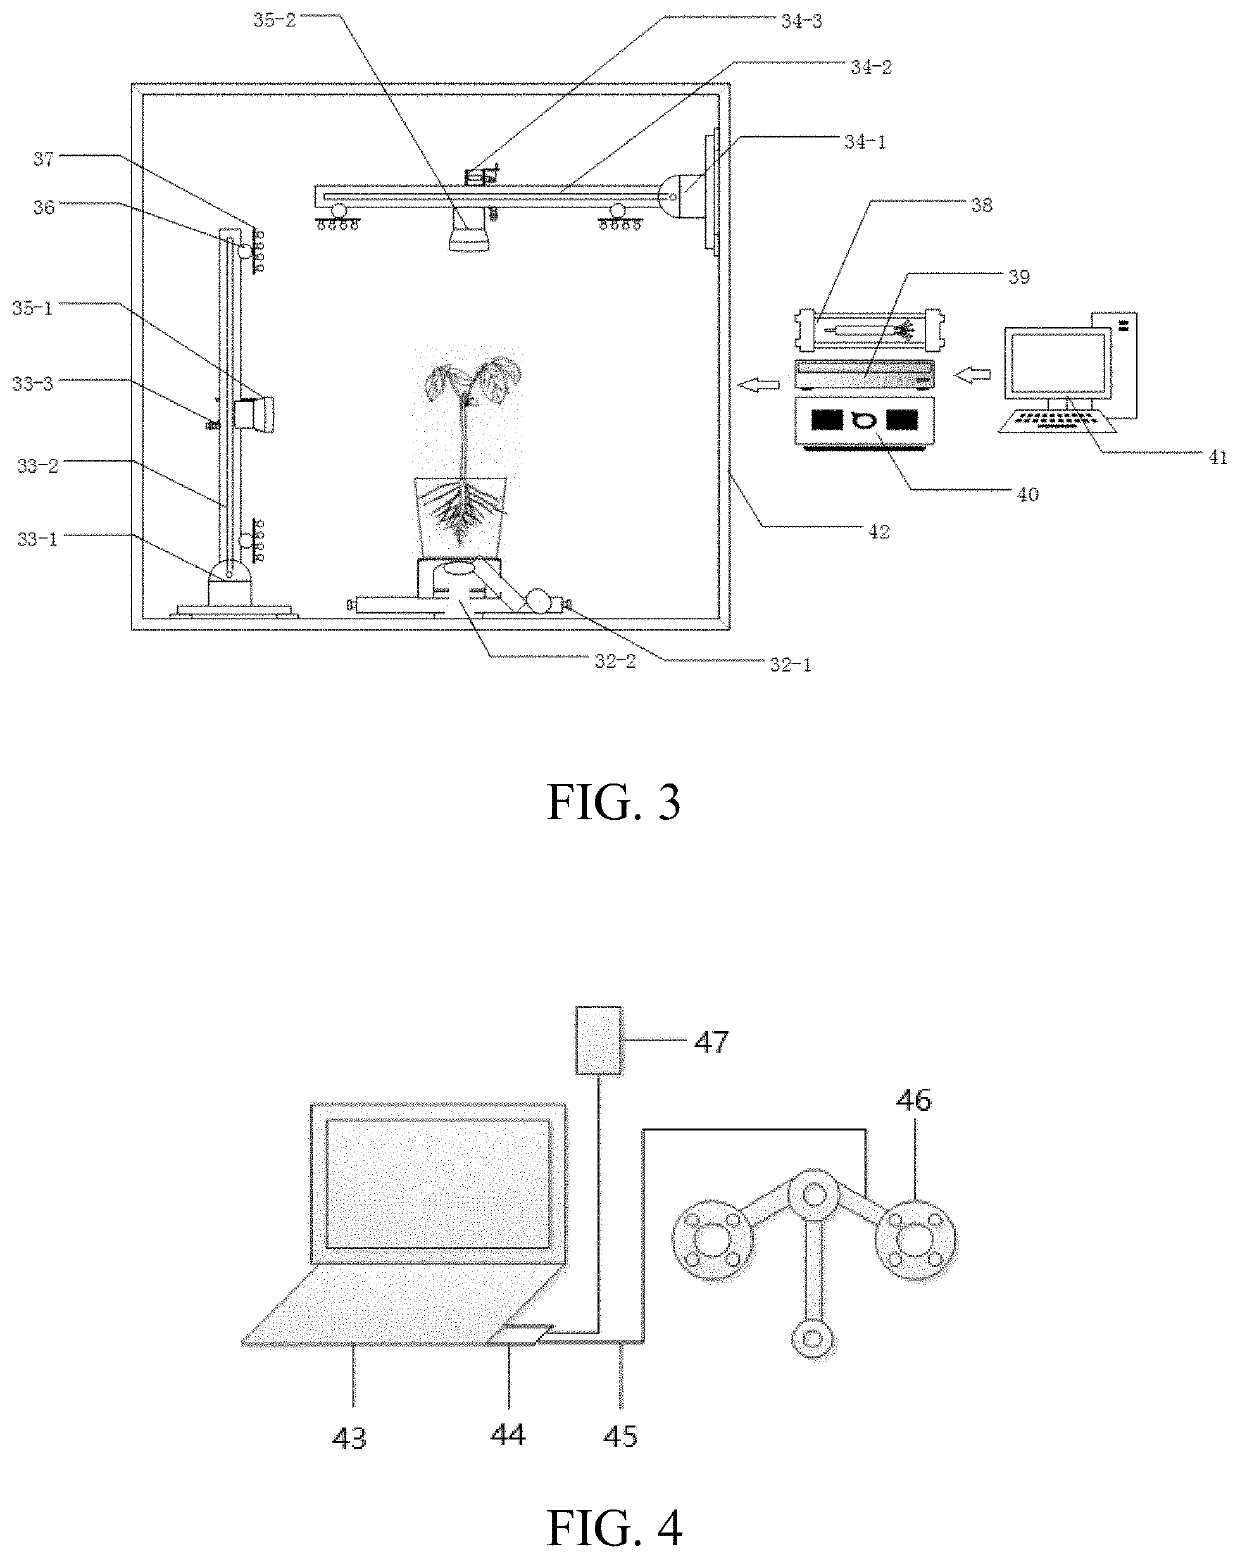 Multi-Scale Habitat Information-Based Method and Device For Detecting and Controlling Water and Fertilizer For Crops In Seedling Stage